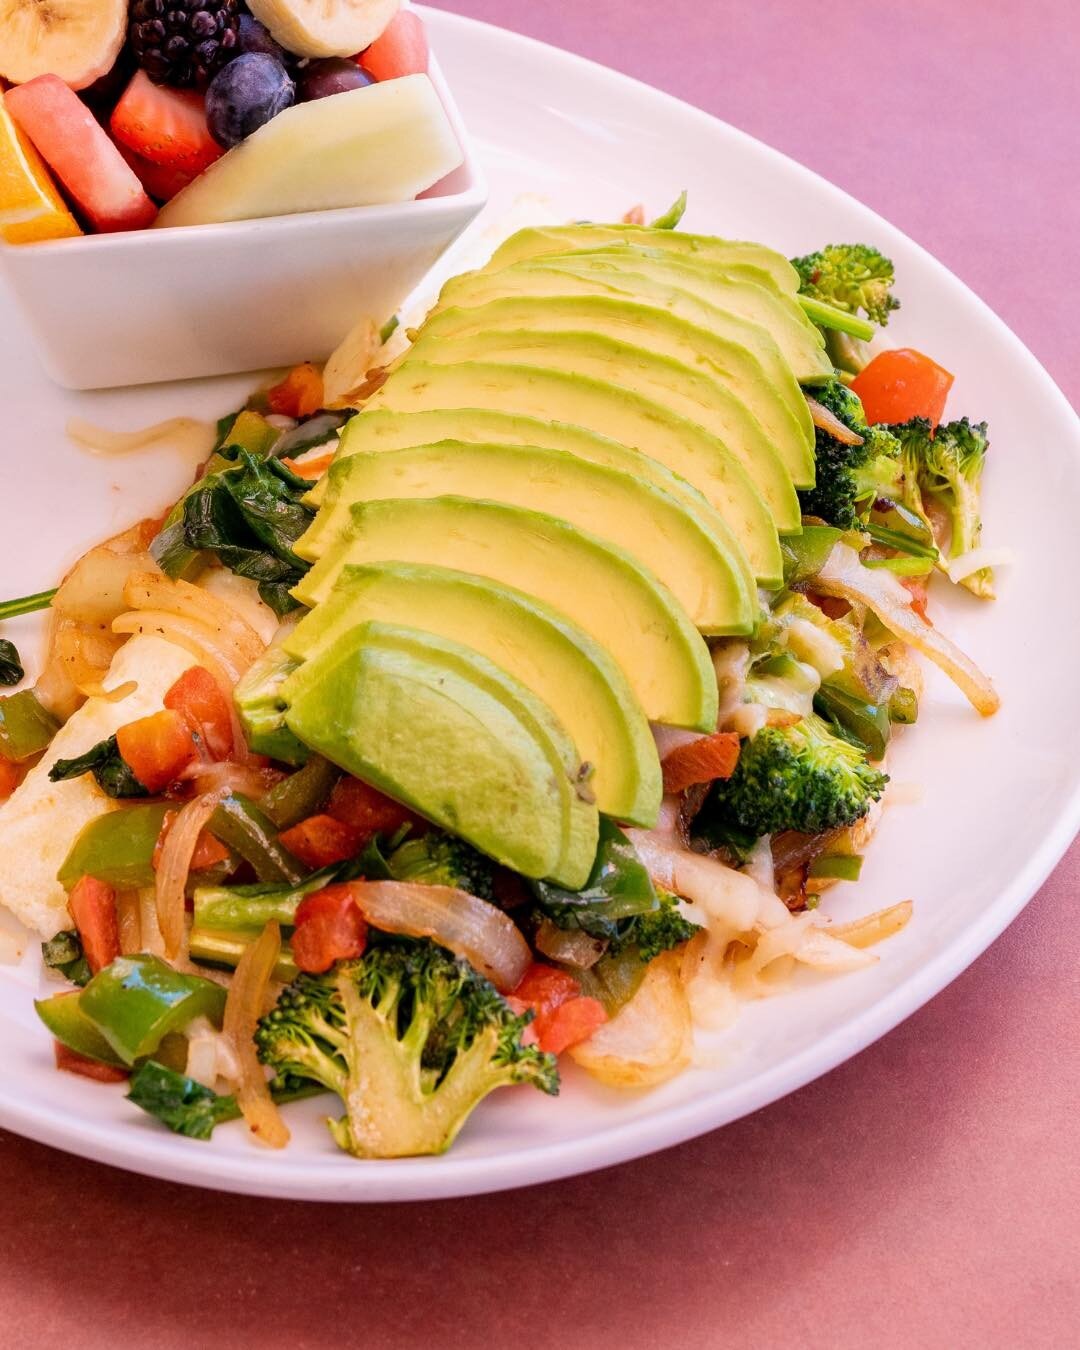 Offer the best hass avocado in your restaurant 🥑
We are suppliers of mexican avocado in California.

Learn about our distribution routes at www.ricosavocados.com 🚛

#ricosavocados #avocados #freshproducersupplier #avocadosuppliers #mexicanavocados 